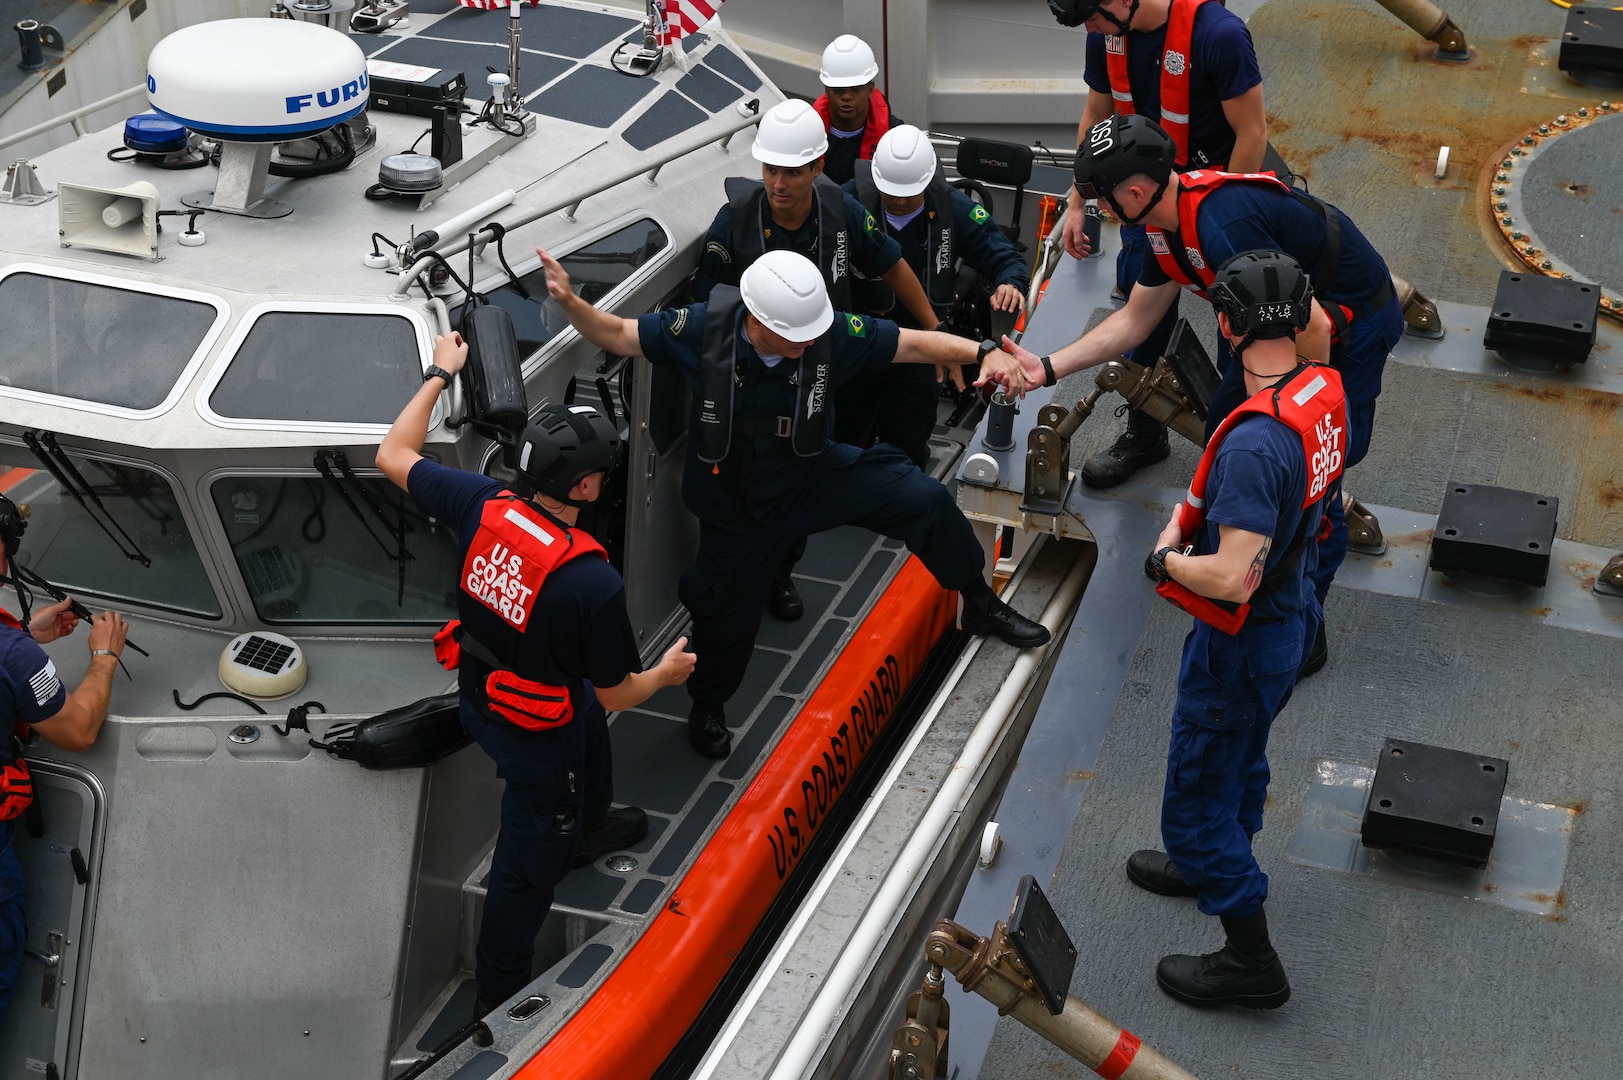 USCGC Stone (WMSL 758) crew members assist Brazilian Navy personnel aboard the Stone during combined exercises in the Southern Atlantic Ocean, March 6, 2023. Stone is on a scheduled multi-mission deployment in the South Atlantic Ocean to counter illicit maritime activities and strengthen relationships for maritime sovereignty throughout the region. (U.S. Coast Guard photo by Petty Officer 3rd Class Riley Perkofski)